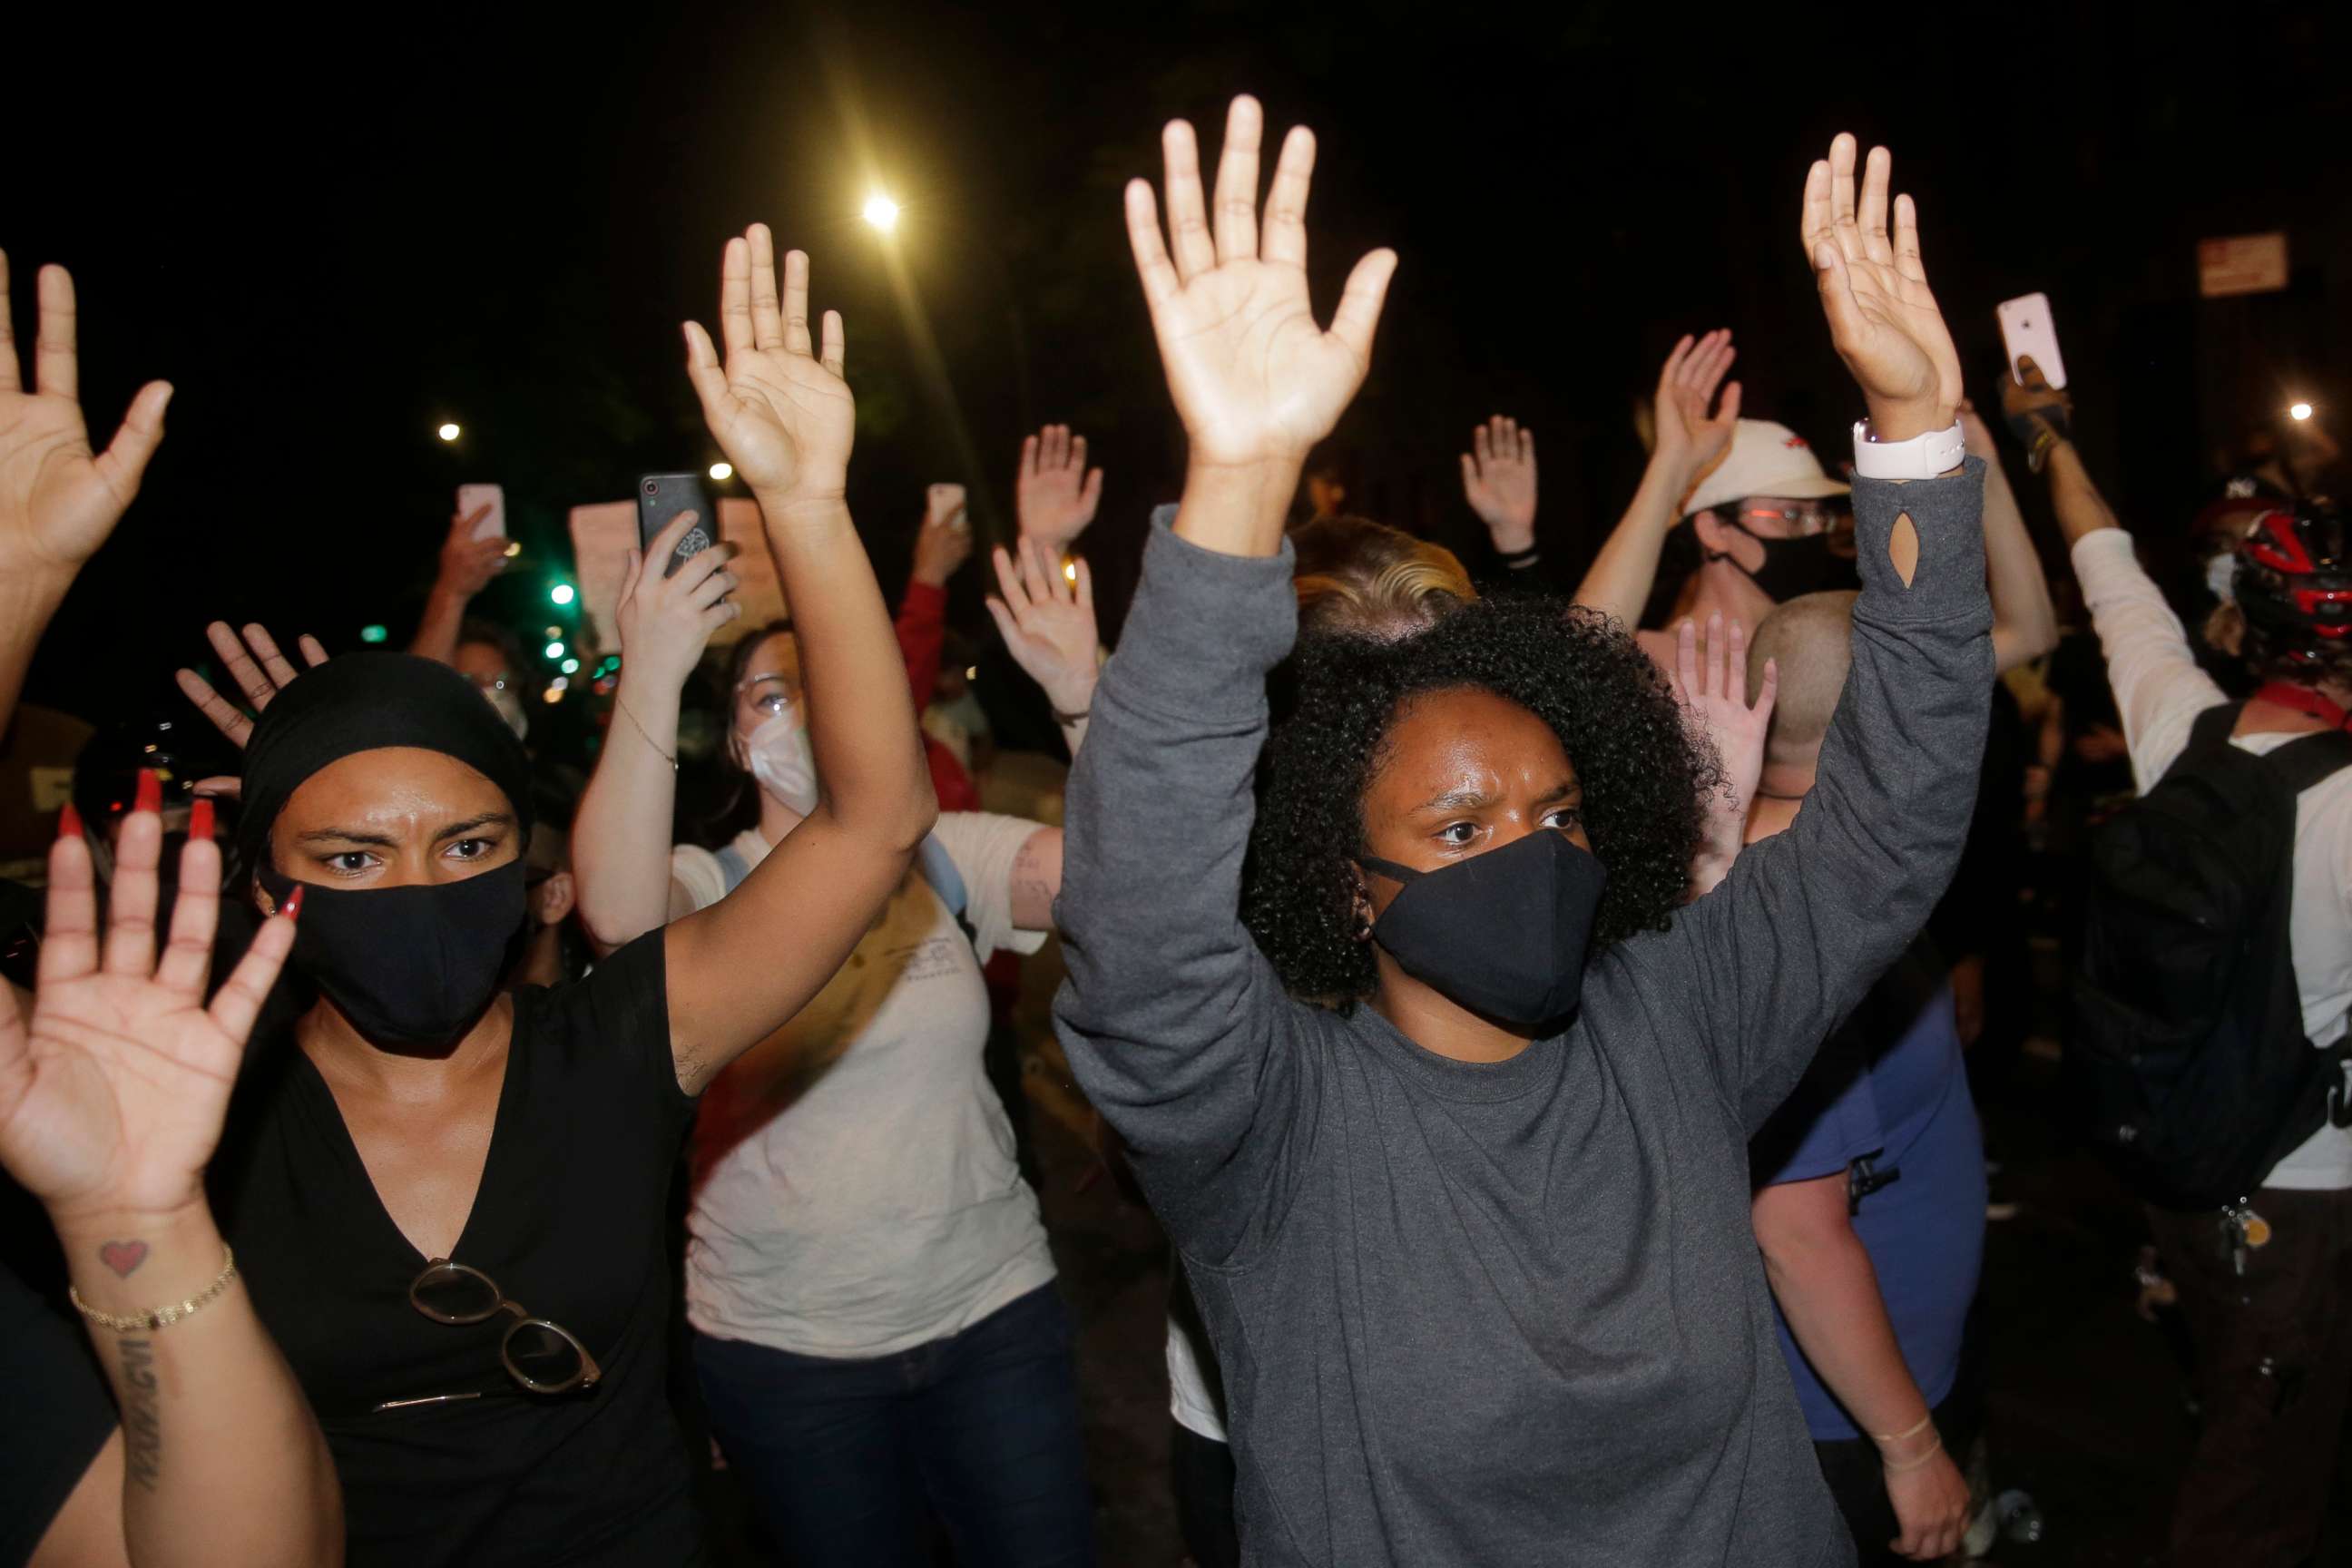 PHOTO: Protesters hold their hands in the air during a protest in response to the death of George Floyd in Minneapolis police custody, in Brooklyn New York, May 30, 2020.